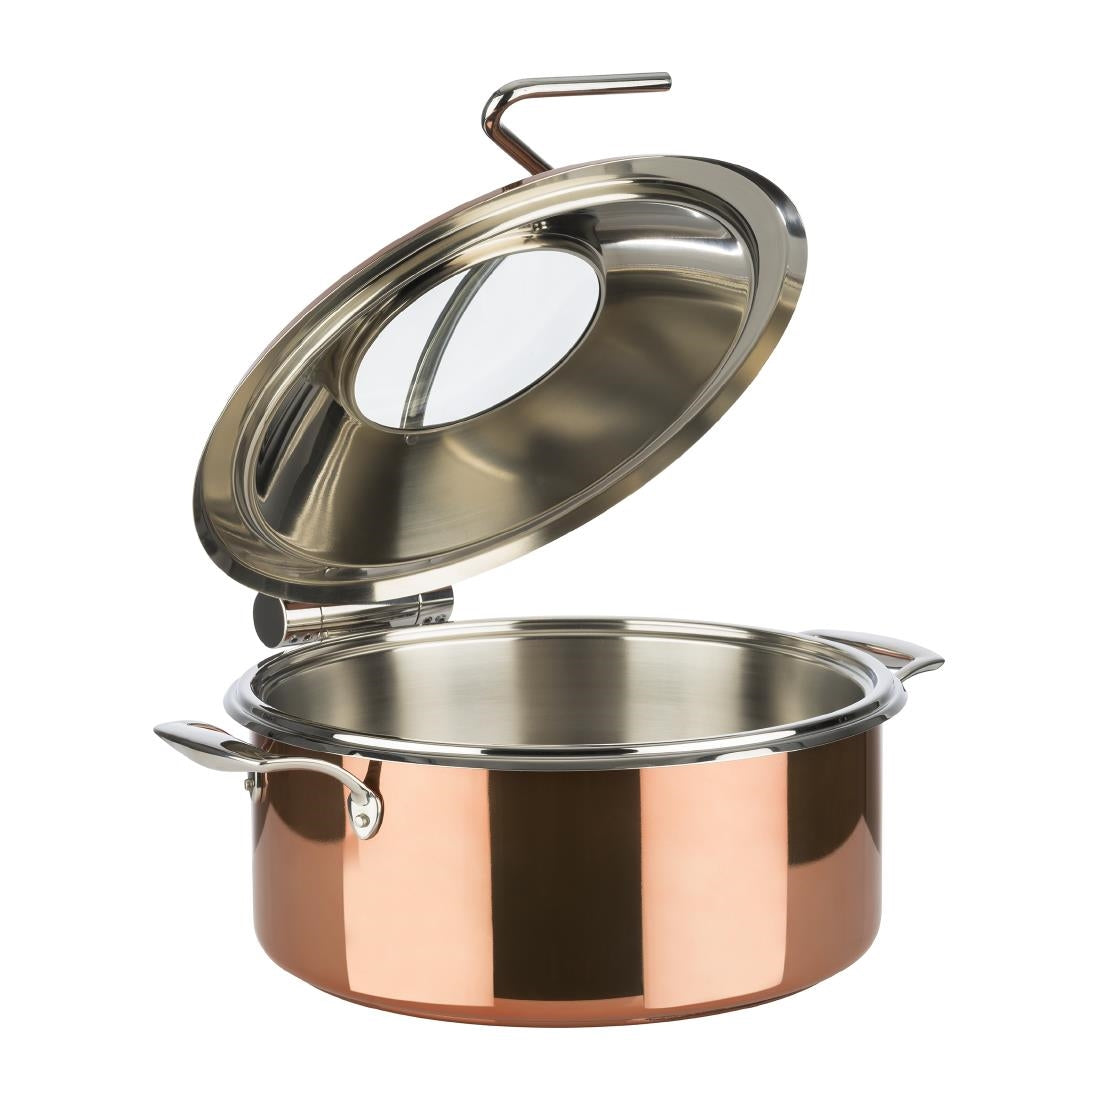 FT167 APS Chafing Dish Set Copper 305mm JD Catering Equipment Solutions Ltd